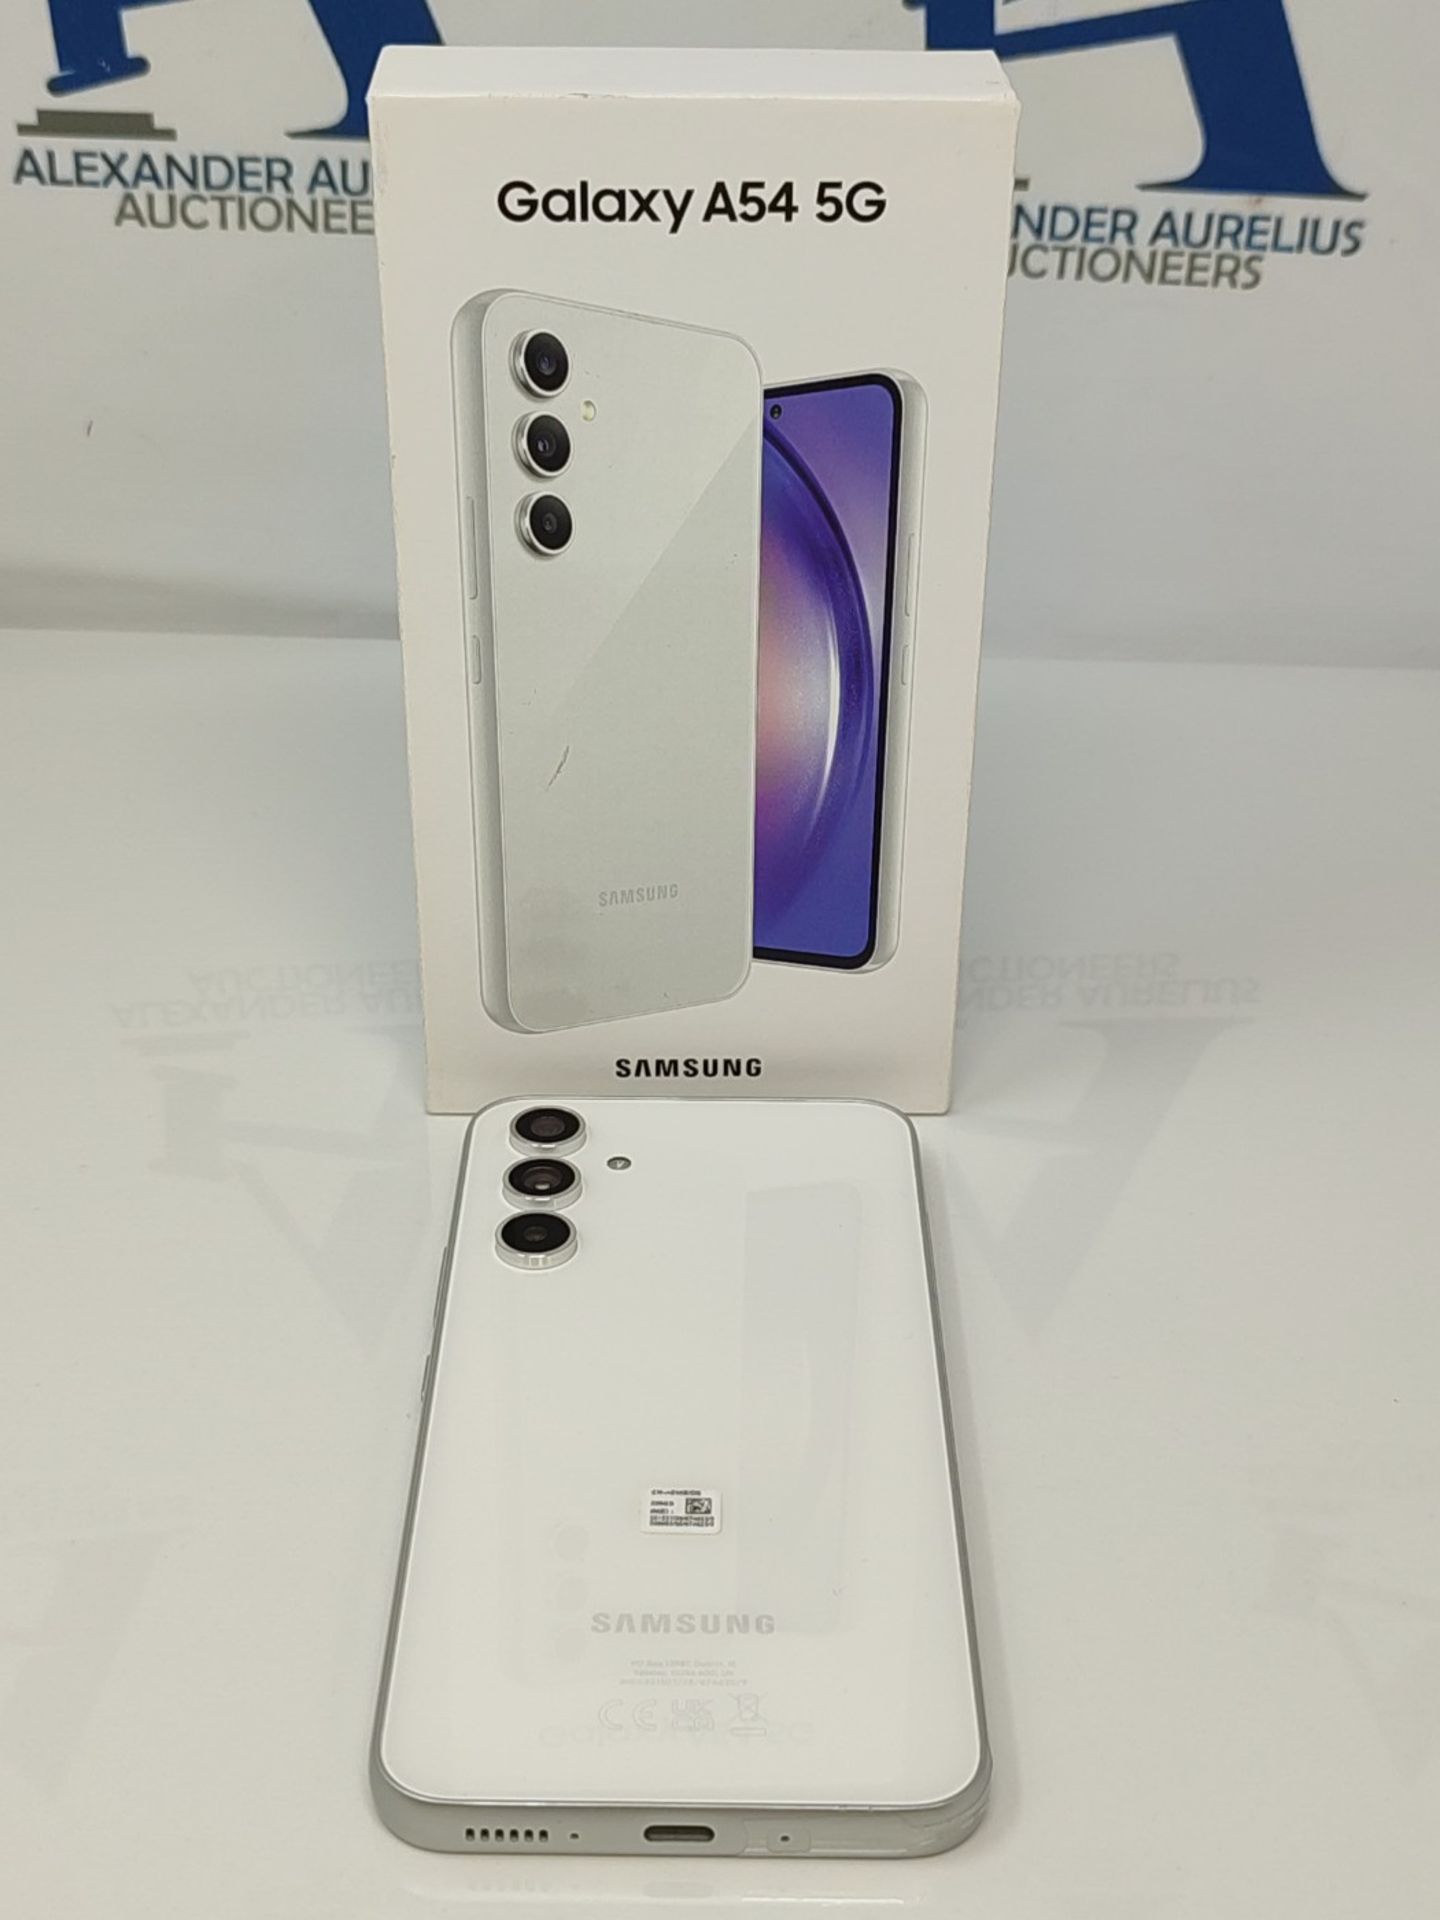 RRP £372.00 Samsung Galaxy A54 256GB 5G Mobile Phone - Awesome White, SM-A546BZWDEUB - Image 3 of 3